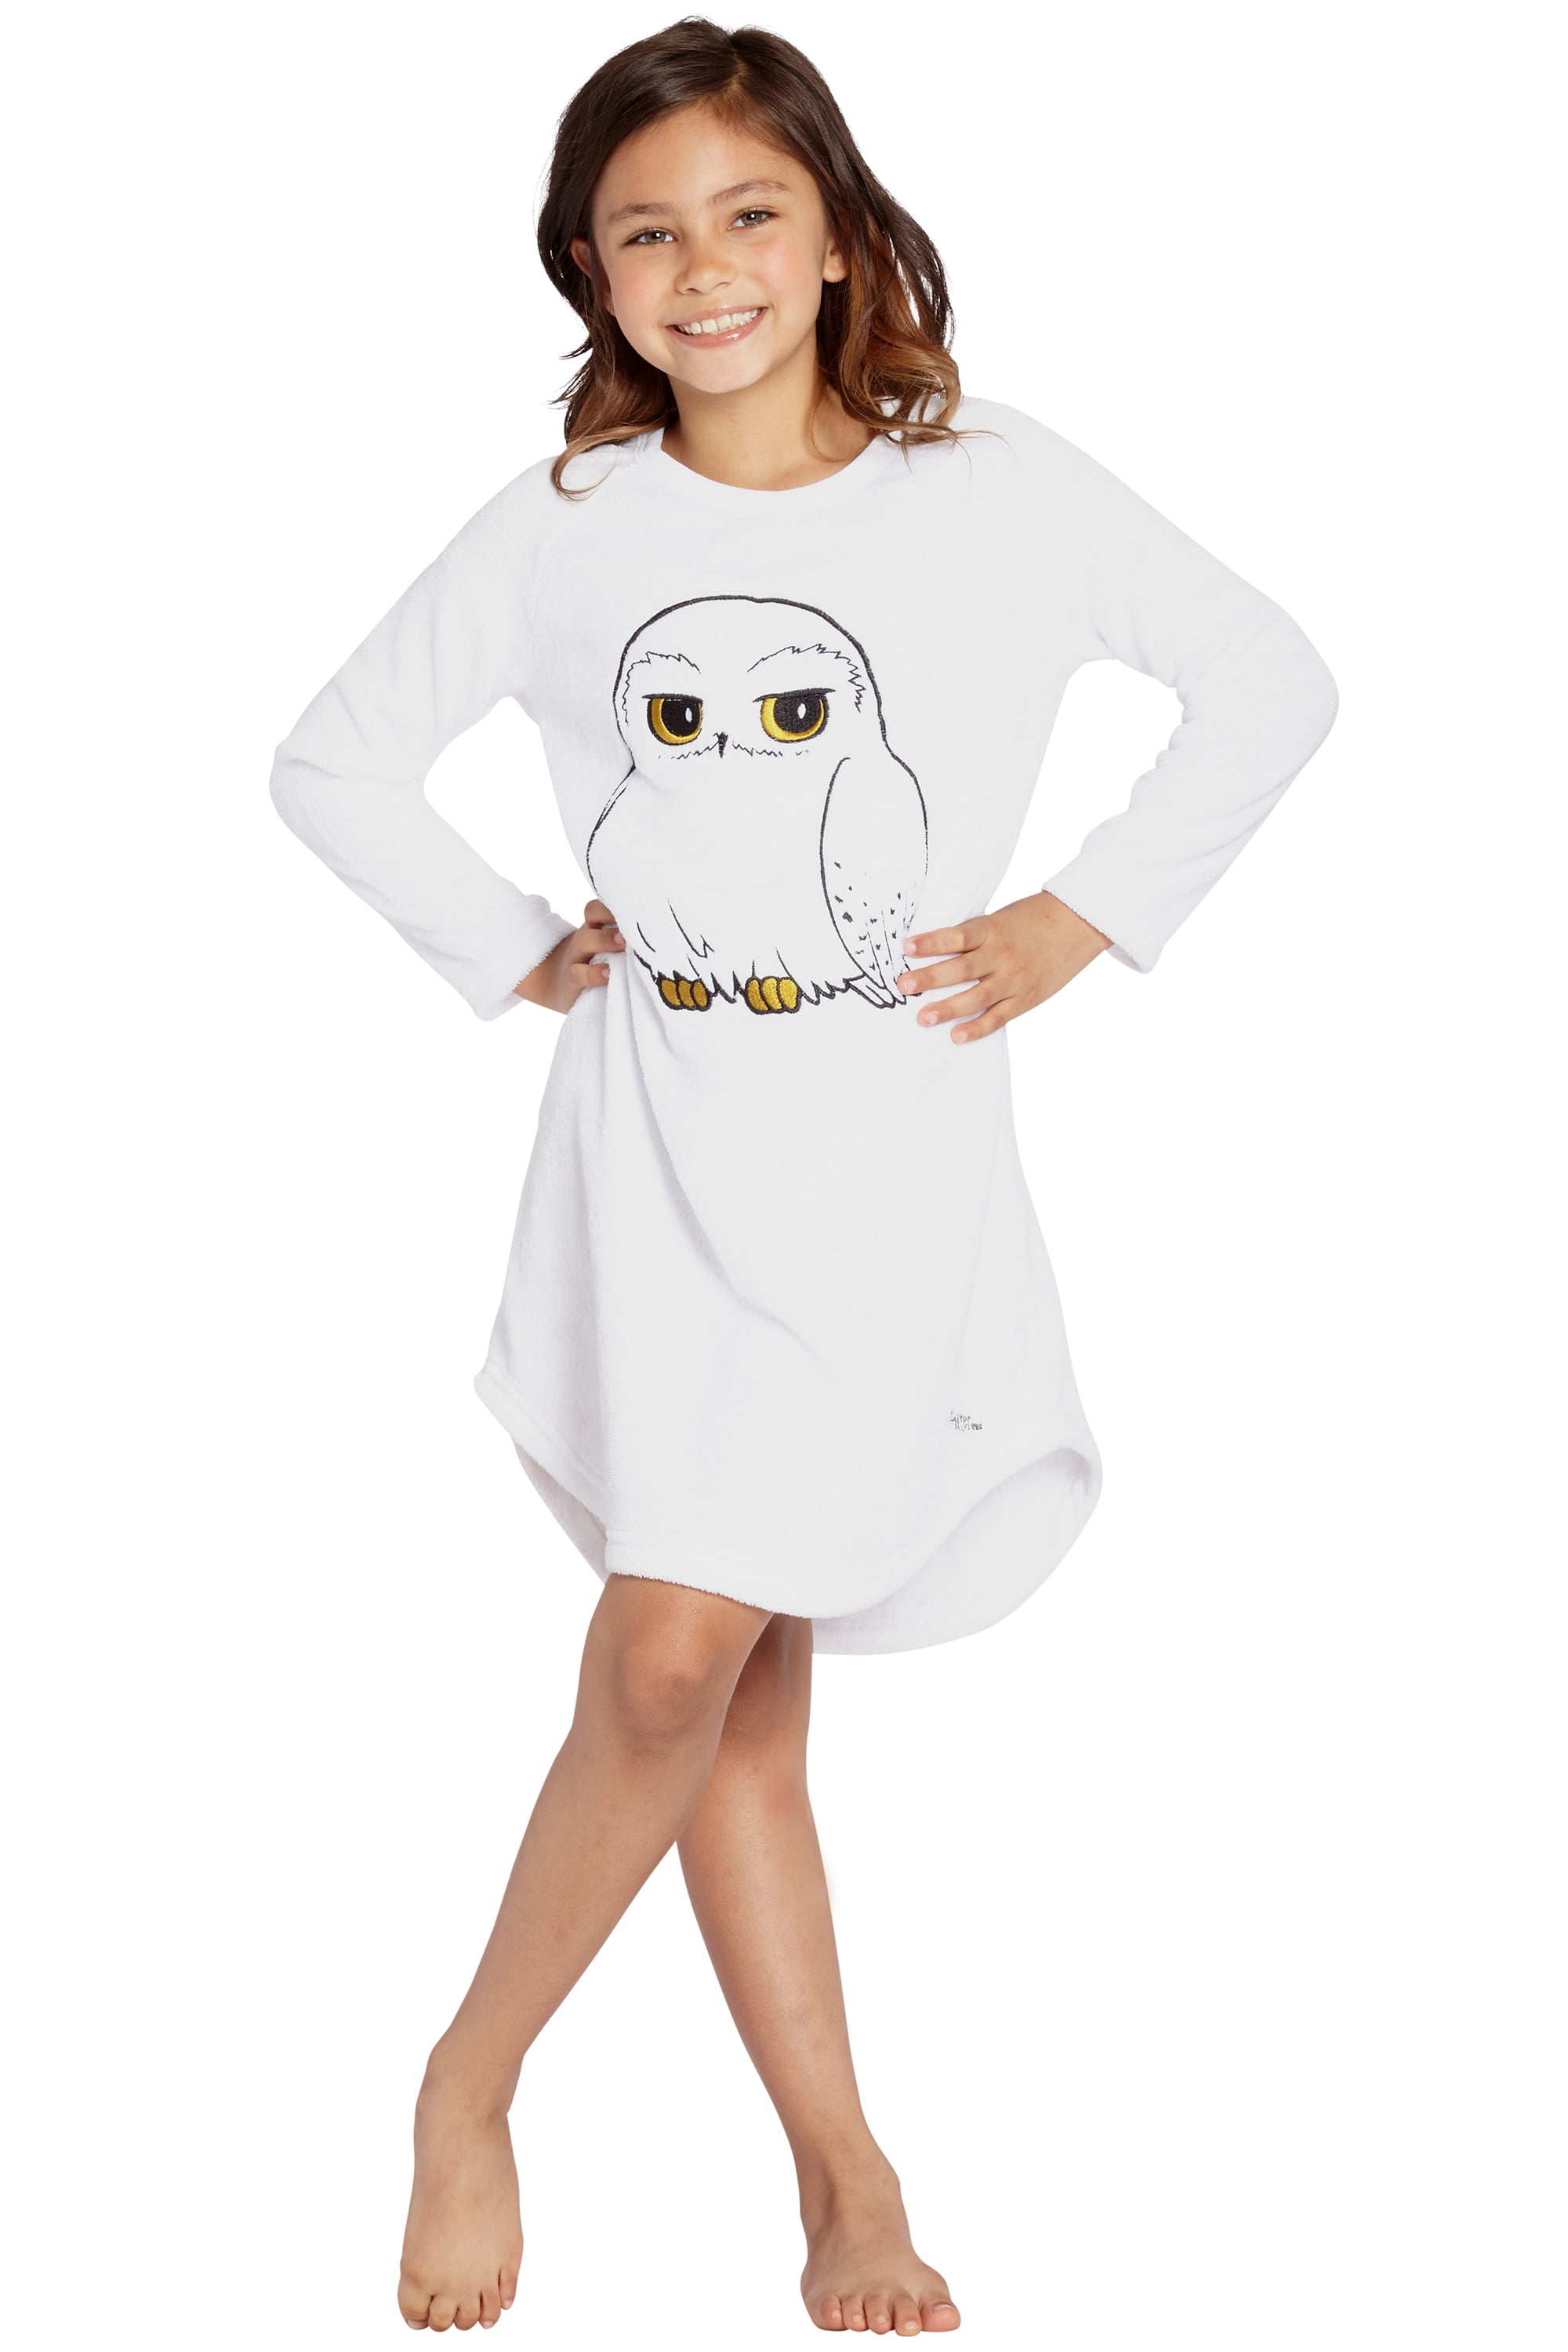 INTIMO Harry Potter Nightgown Id Rather Stay at Hogwarts This Christmas Girls Pajamas